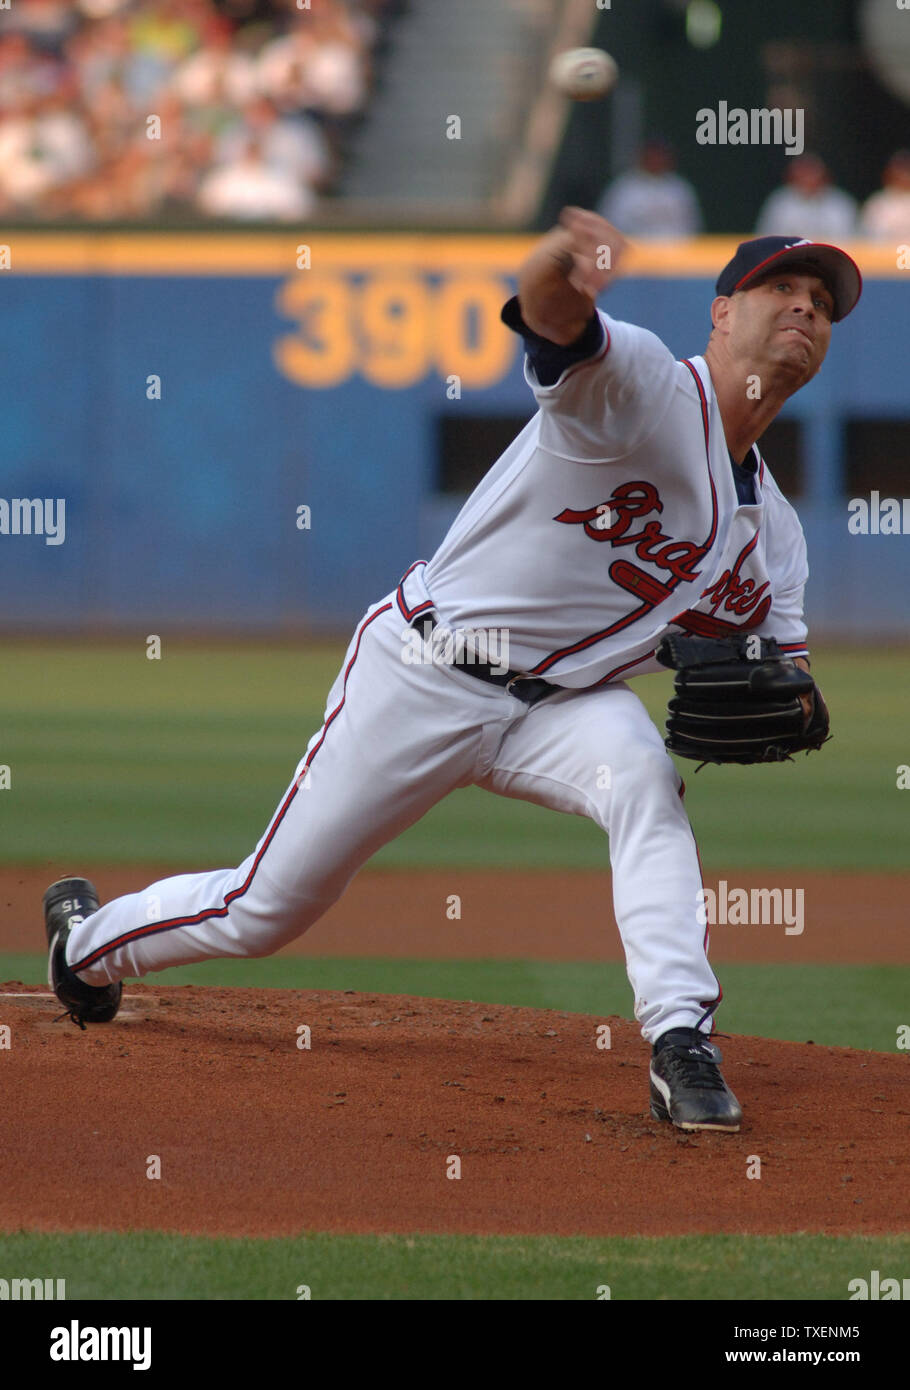 Atlanta Braves starting pitcher Tim Hudson throws against the visiting Boston Red Sox in the first inning of interleague playJune 16, 2006, in Atlanta's Turner Field.  (UPI Photo/John Dickerson) Stock Photo